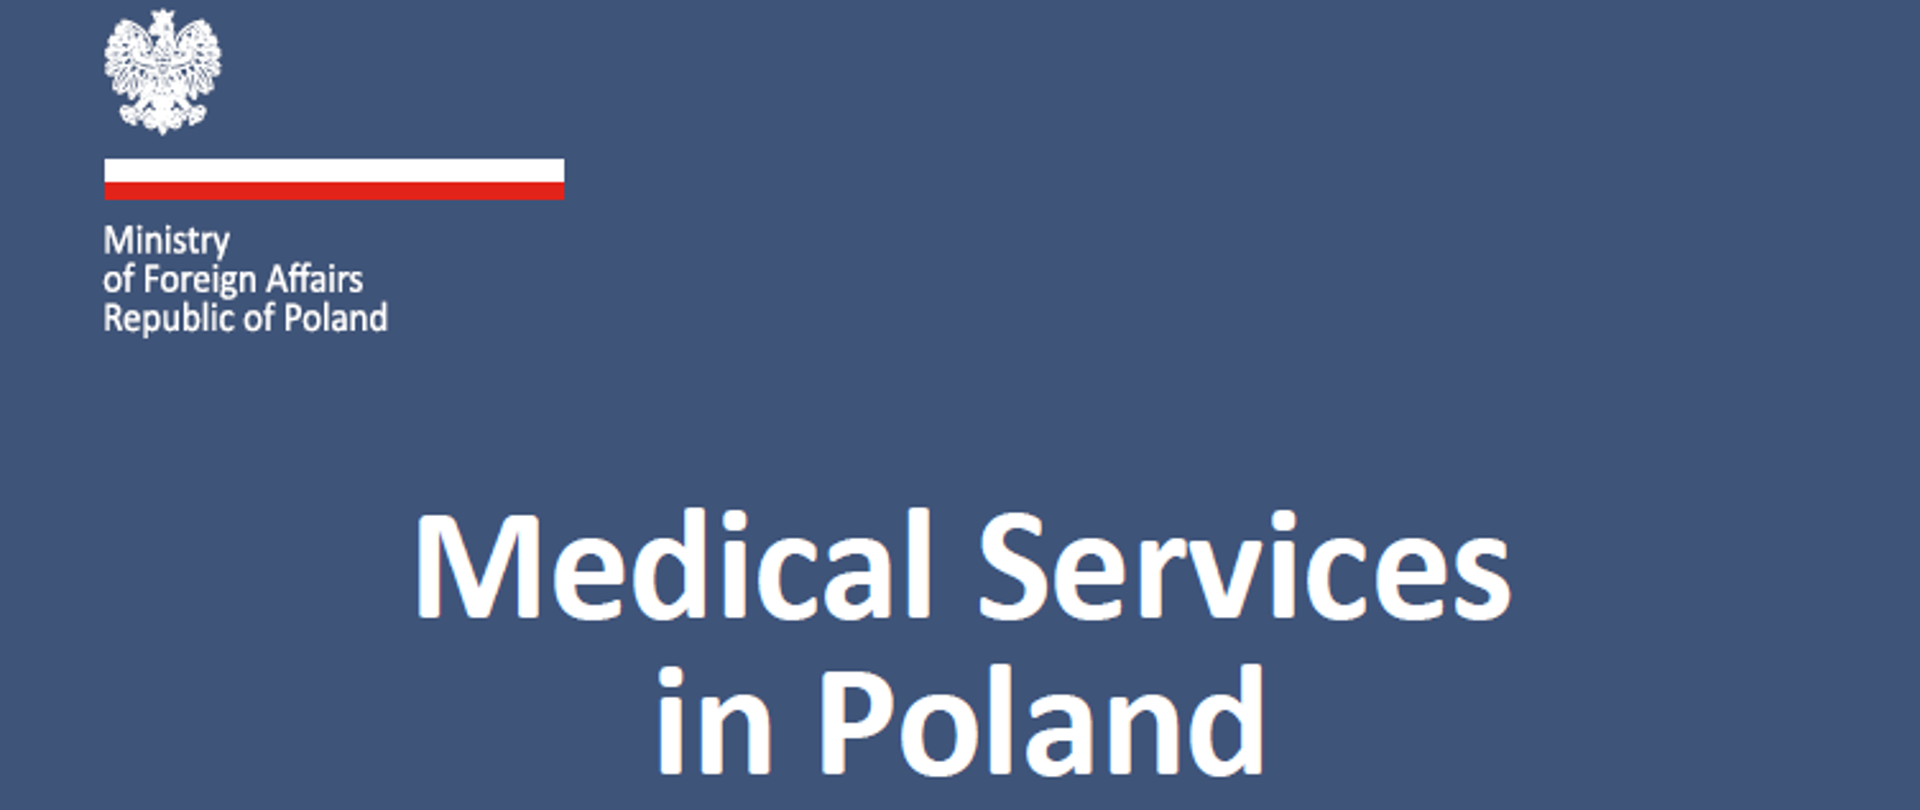 Medical Services in Poland 2020